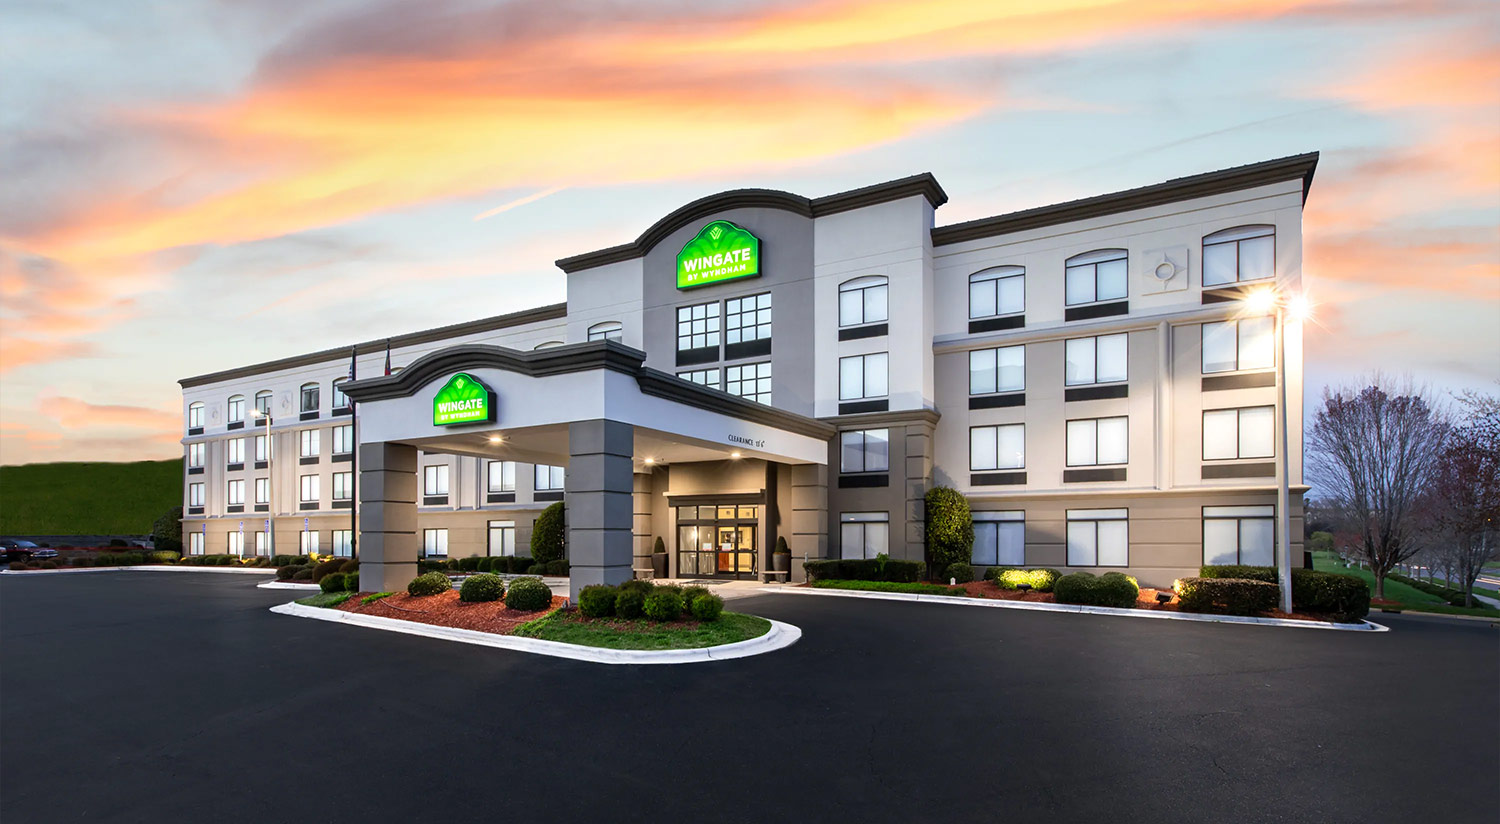 WELCOME TO THE WINGATE by WYNDHAM CONCORD/CHARLOTTE AREA HOTEL